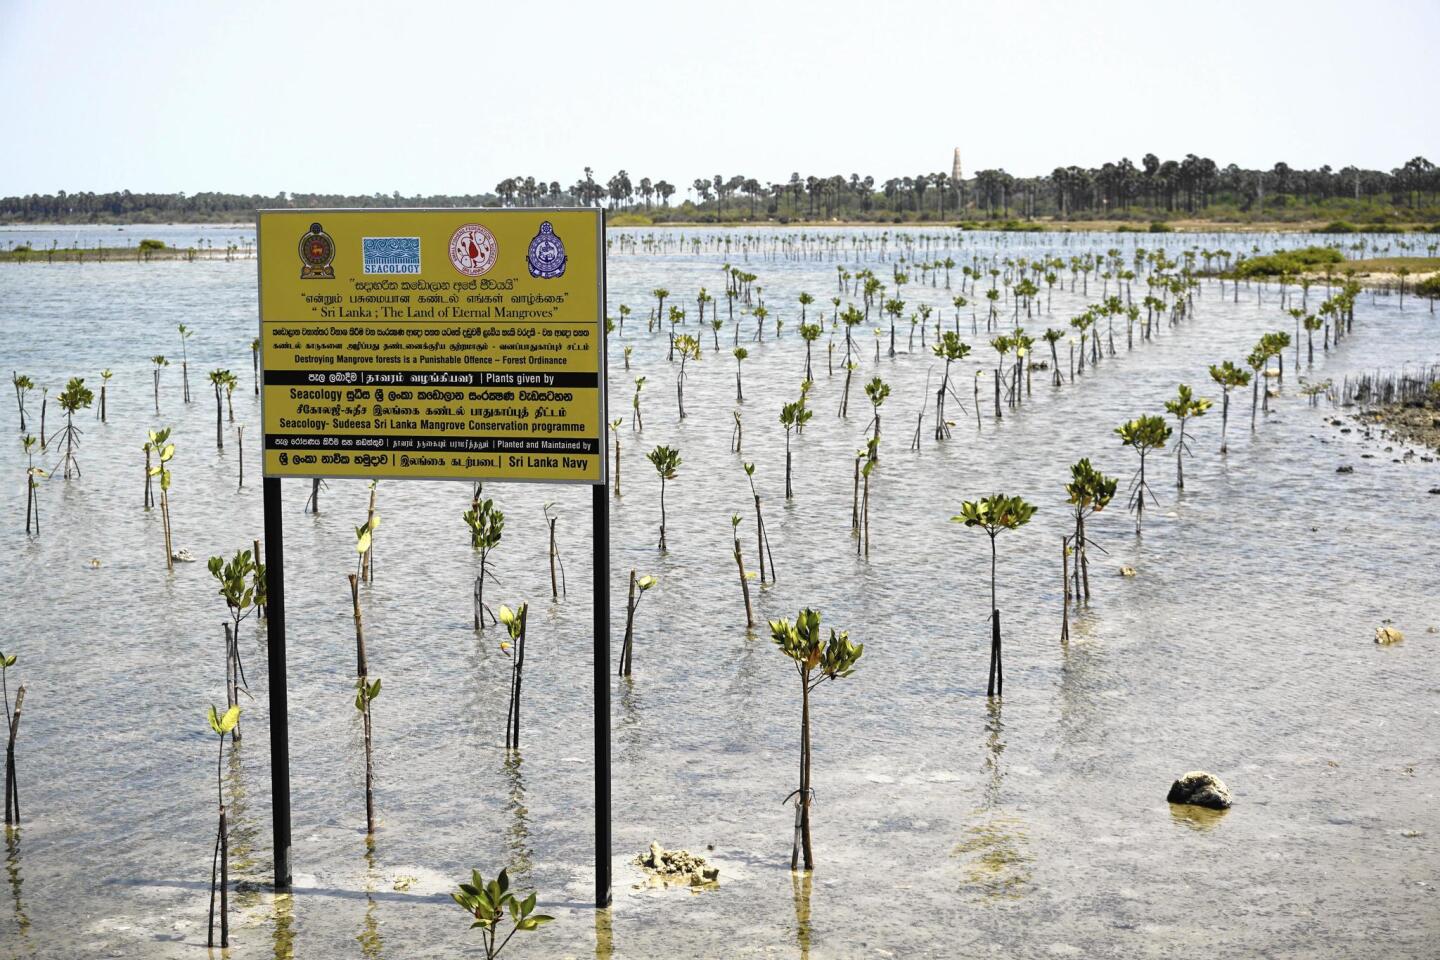 Small mangrove plants are meant to replenish some of the tropical trees that have been lost in Sri Lanka. The California-based environmental nonprofit Seacology has pumped millions of dollars into mangrove restoration projects on this island nation.